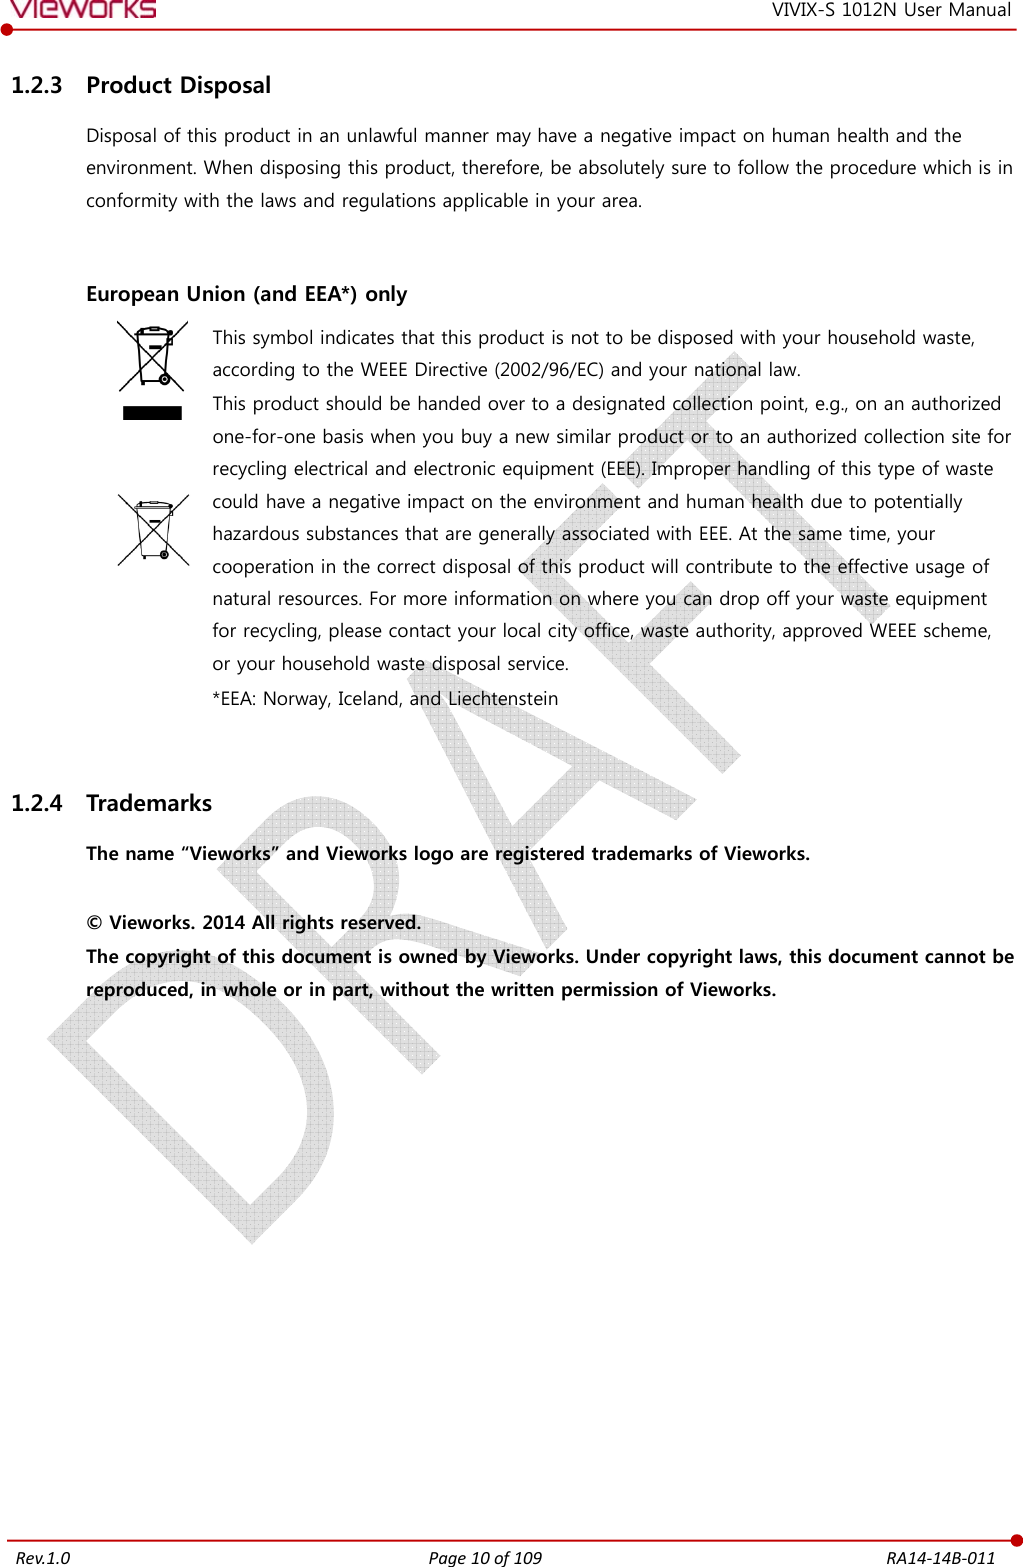   Rev.1.0 Page 10 of 109  RA14-14B-011 VIVIX-S 1012N User Manual 1.2.3 Product Disposal Disposal of this product in an unlawful manner may have a negative impact on human health and the environment. When disposing this product, therefore, be absolutely sure to follow the procedure which is in conformity with the laws and regulations applicable in your area.   European Union (and EEA*) only     This symbol indicates that this product is not to be disposed with your household waste, according to the WEEE Directive (2002/96/EC) and your national law. This product should be handed over to a designated collection point, e.g., on an authorized one-for-one basis when you buy a new similar product or to an authorized collection site for recycling electrical and electronic equipment (EEE). Improper handling of this type of waste could have a negative impact on the environment and human health due to potentially hazardous substances that are generally associated with EEE. At the same time, your cooperation in the correct disposal of this product will contribute to the effective usage of natural resources. For more information on where you can drop off your waste equipment for recycling, please contact your local city office, waste authority, approved WEEE scheme, or your household waste disposal service. *EEA: Norway, Iceland, and Liechtenstein  1.2.4 Trademarks The name “Vieworks” and Vieworks logo are registered trademarks of Vieworks.  © Vieworks. 2014 All rights reserved. The copyright of this document is owned by Vieworks. Under copyright laws, this document cannot be reproduced, in whole or in part, without the written permission of Vieworks.   